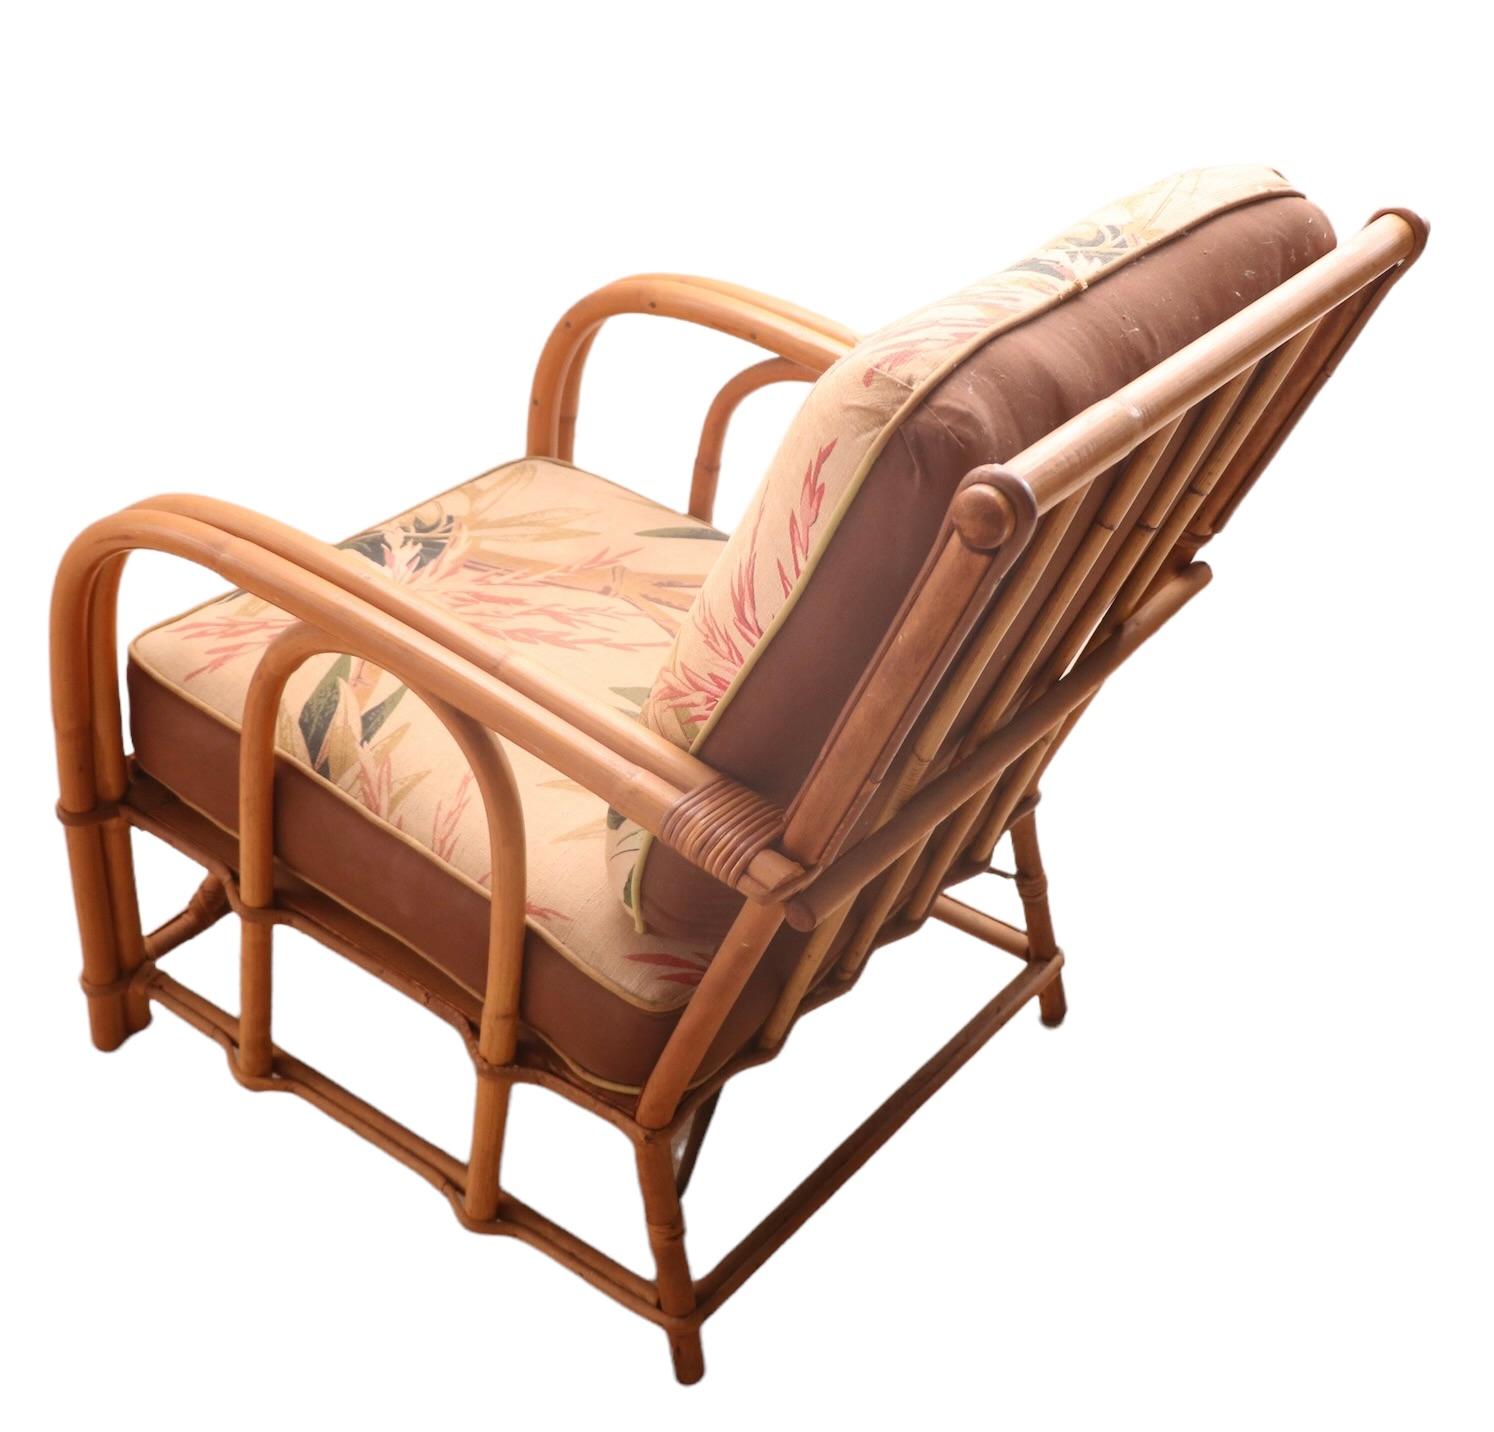 Upholstery Mid-Century Bamboo Lounge Chair by Superior Reed and Rattan Company 1960-1980